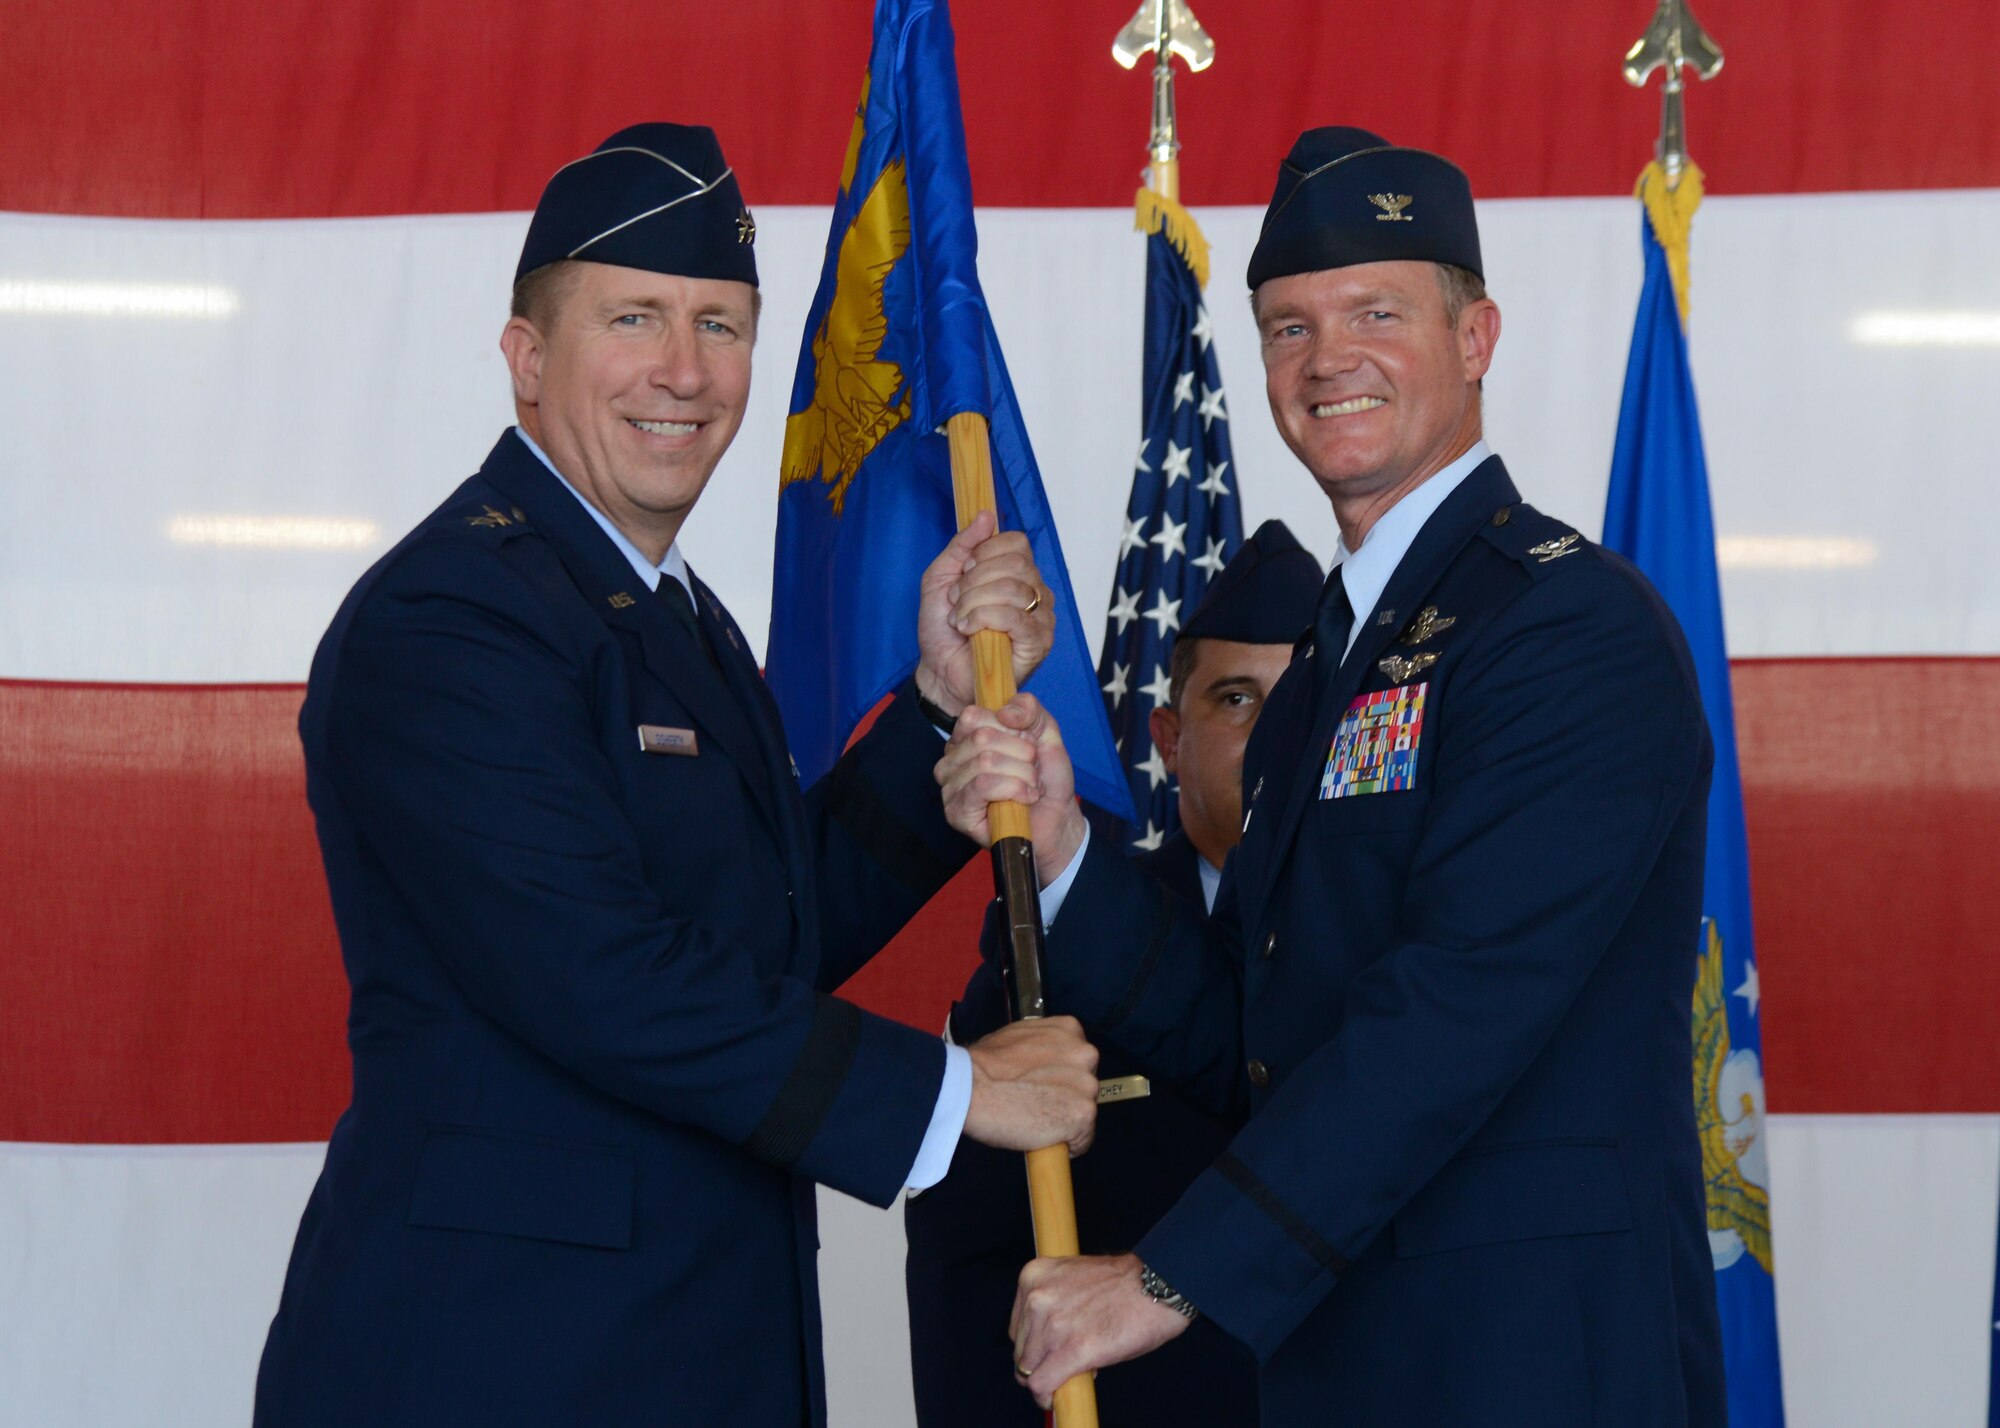 U.S. Air Force Col. Thomas Shank, outgoing 47th Flying Training Wing commander, relinquishes command to Maj. Gen. Patrick Doherty, 19th Air Force commander, during the wing's change of command ceremony at Laughlin Air Force Base, Tx., June 28, 2017. The passing of the guideon symbolizes the ceremonious passing of responsibility and command from one party to another.